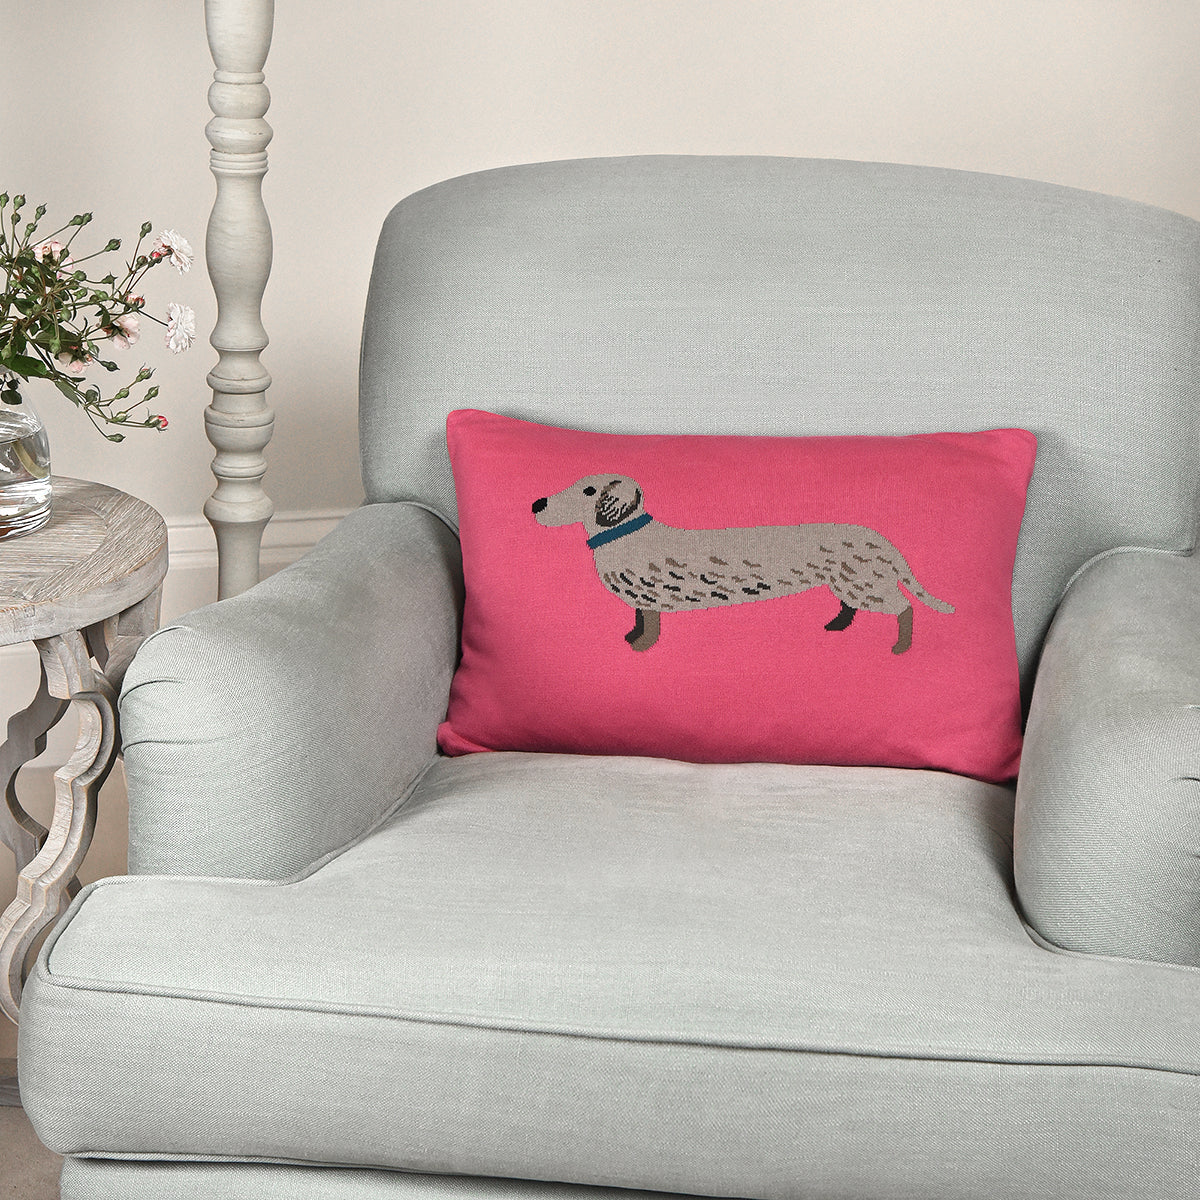 Dachshund Knitted Cushion by Sophie Allport